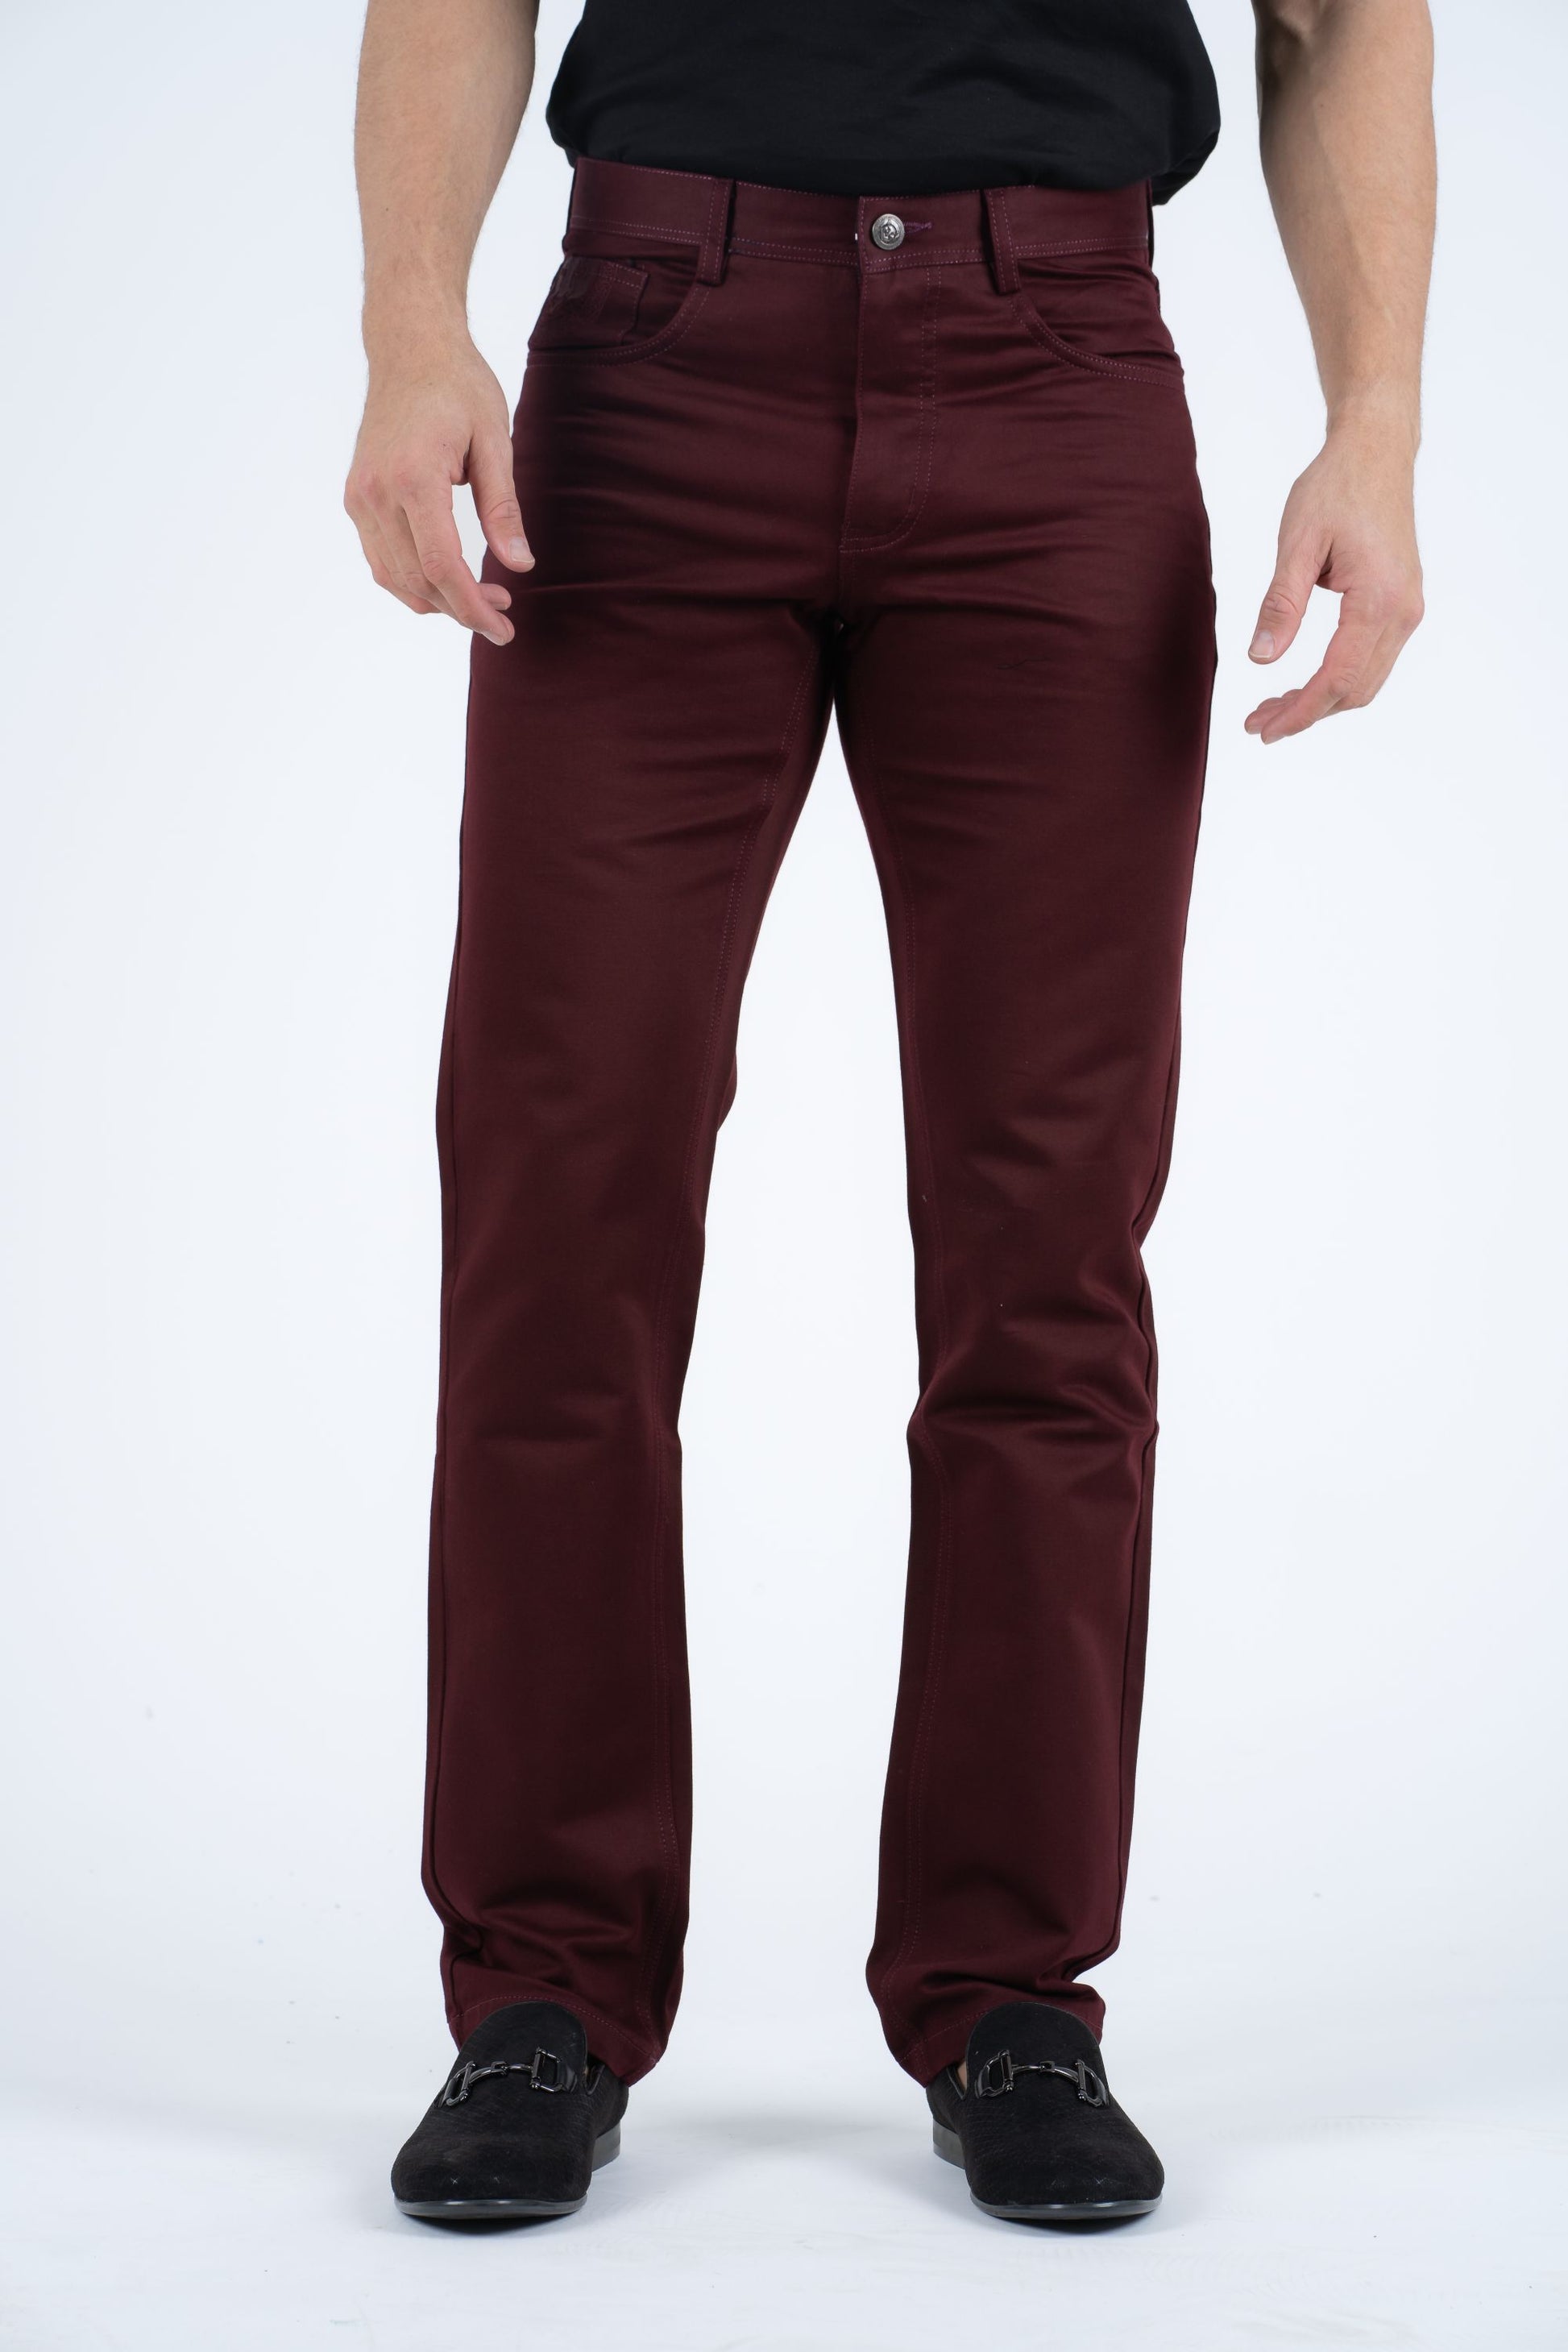 Slade Men's Burgundy Relaxed Fit Stretch Pants – Platini Fashion